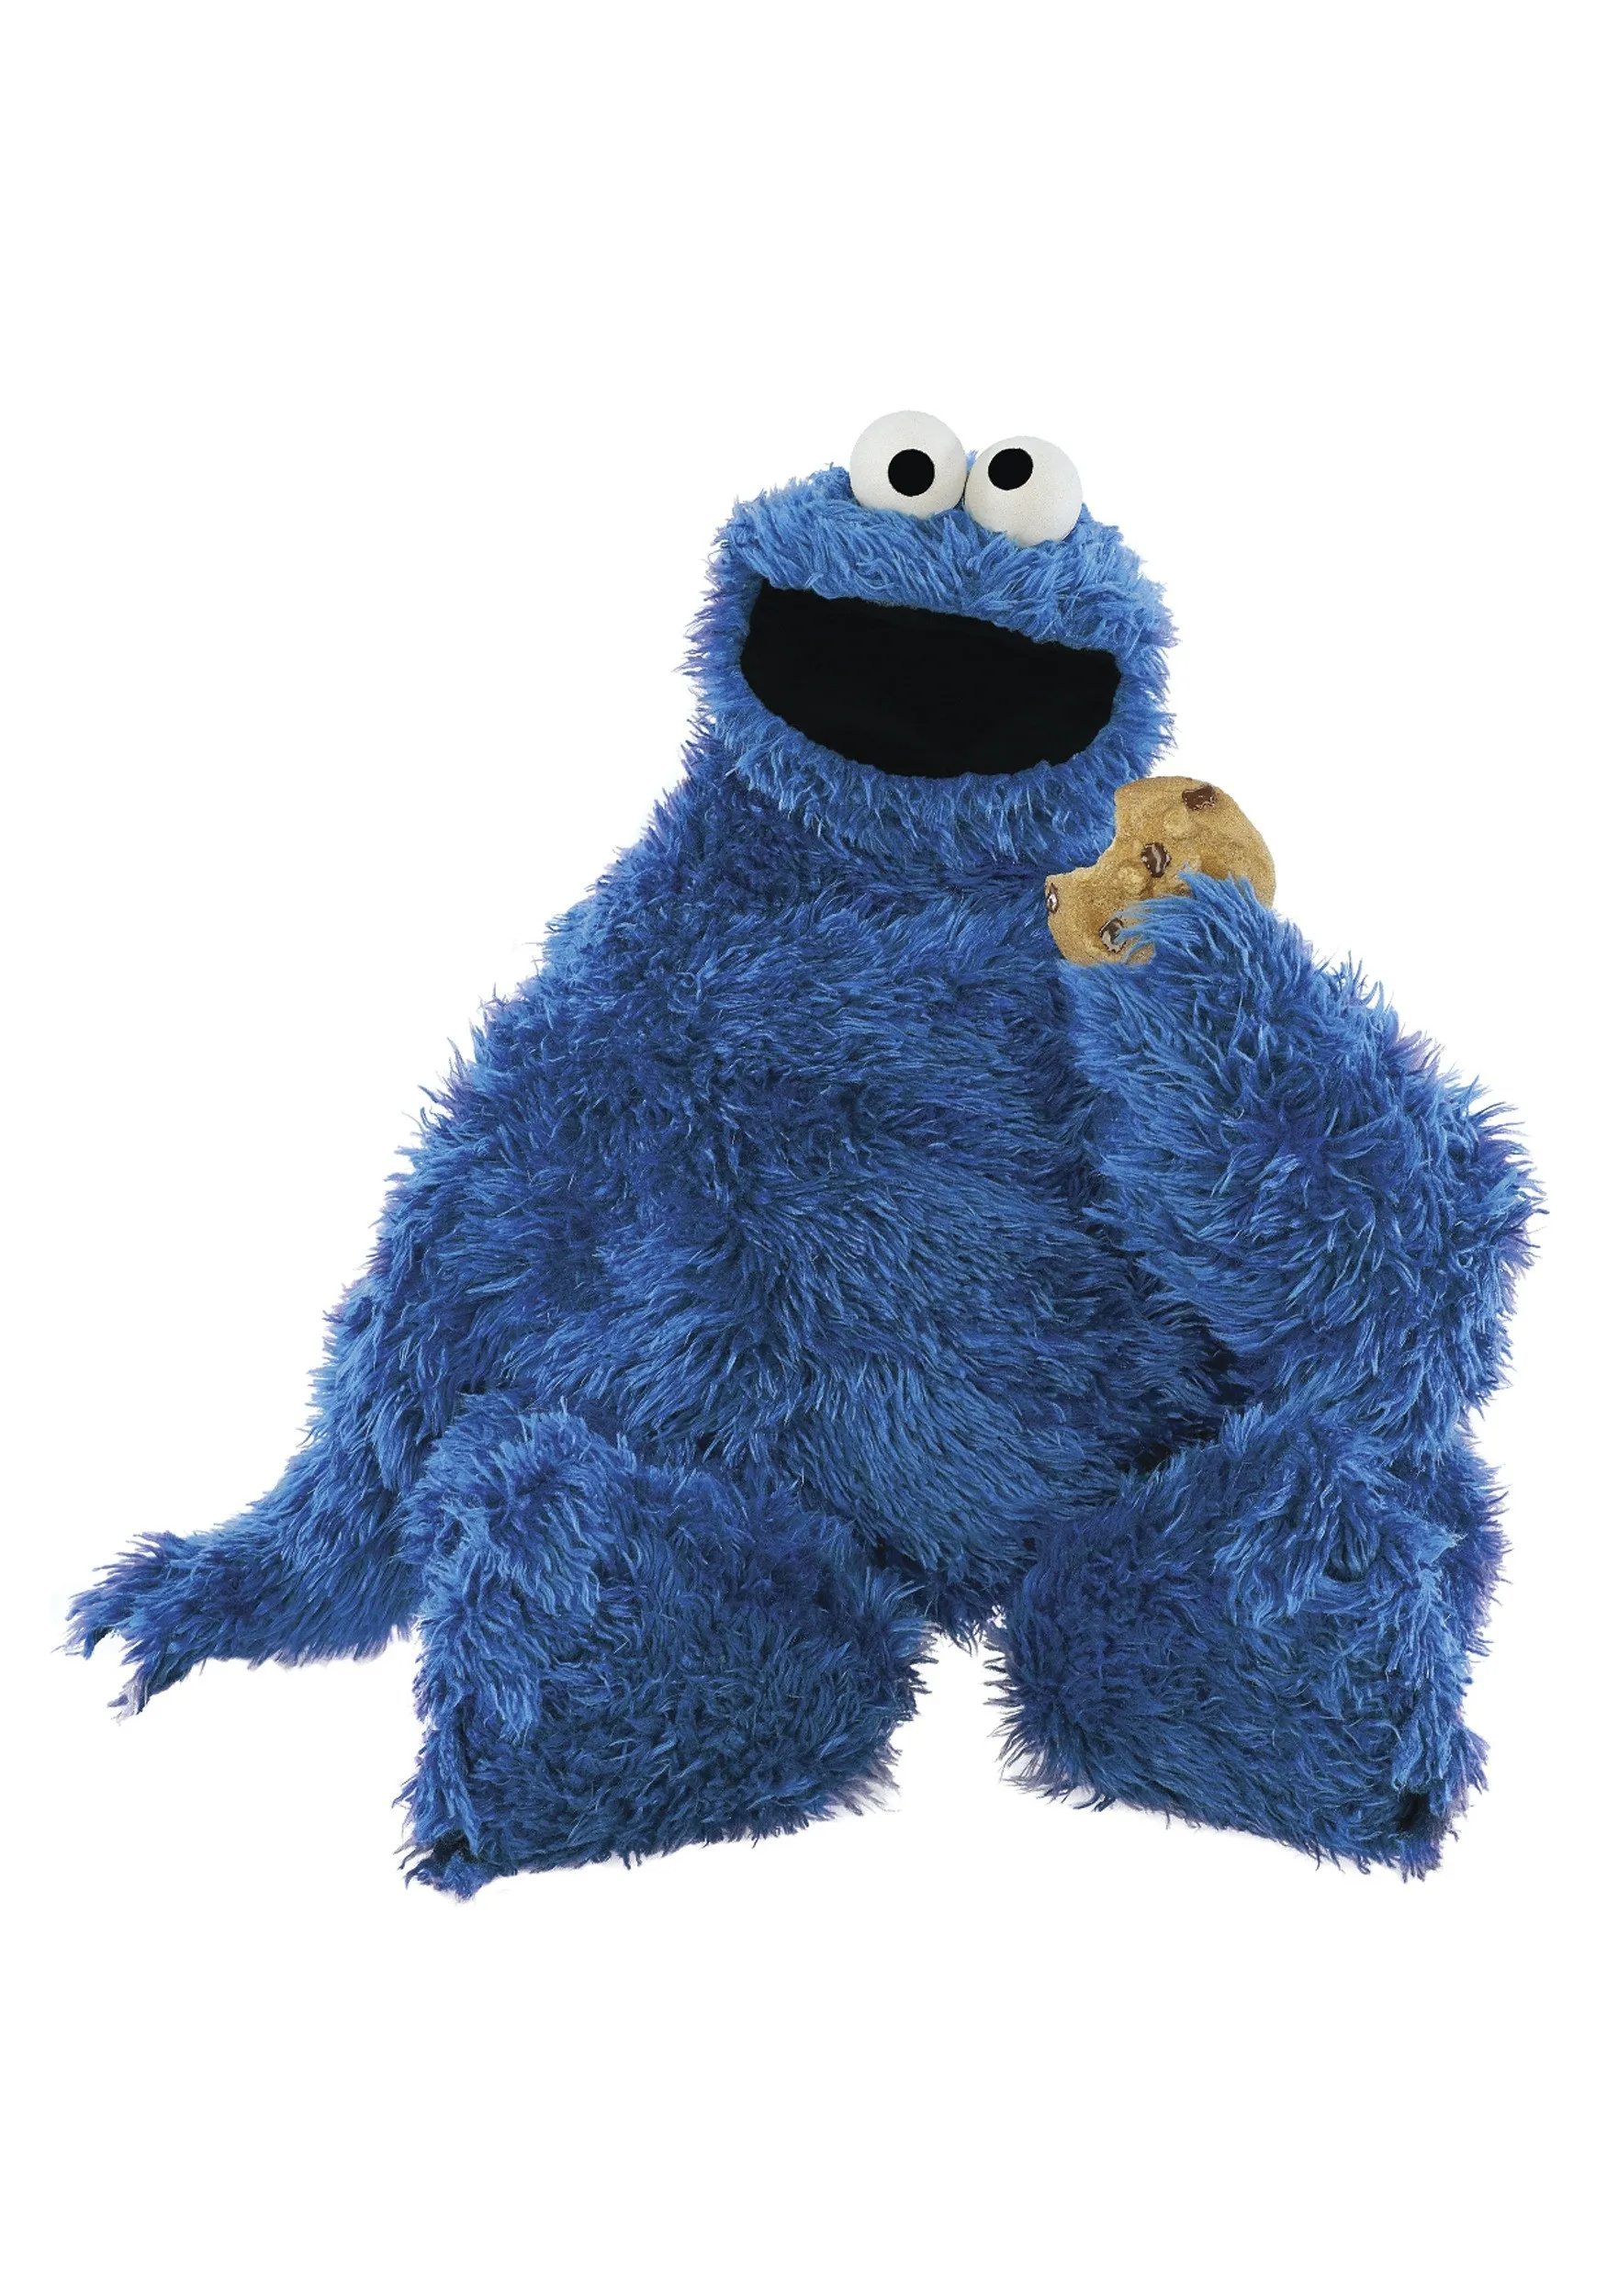 Cute Cookie Monster, Adorable wallpaper, Delightful design, Charming character, 1750x2500 HD Handy